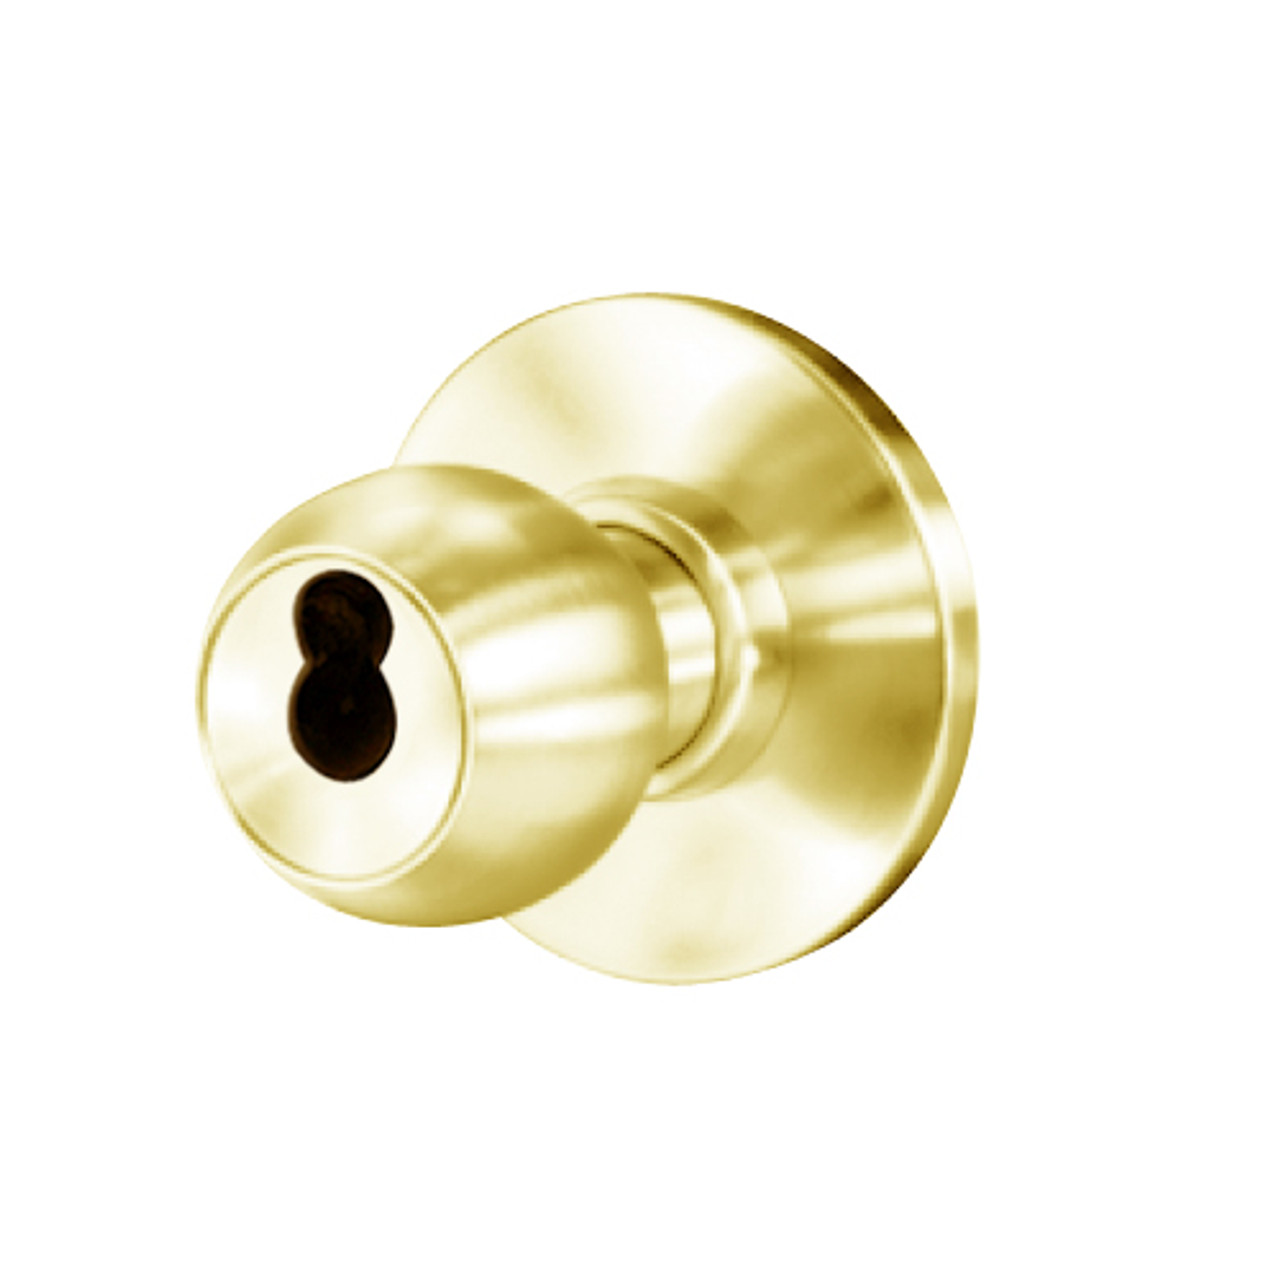 8K57YR4AS3605 Best 8K Series Exit Heavy Duty Cylindrical Knob Locks with Round Style in Bright Brass